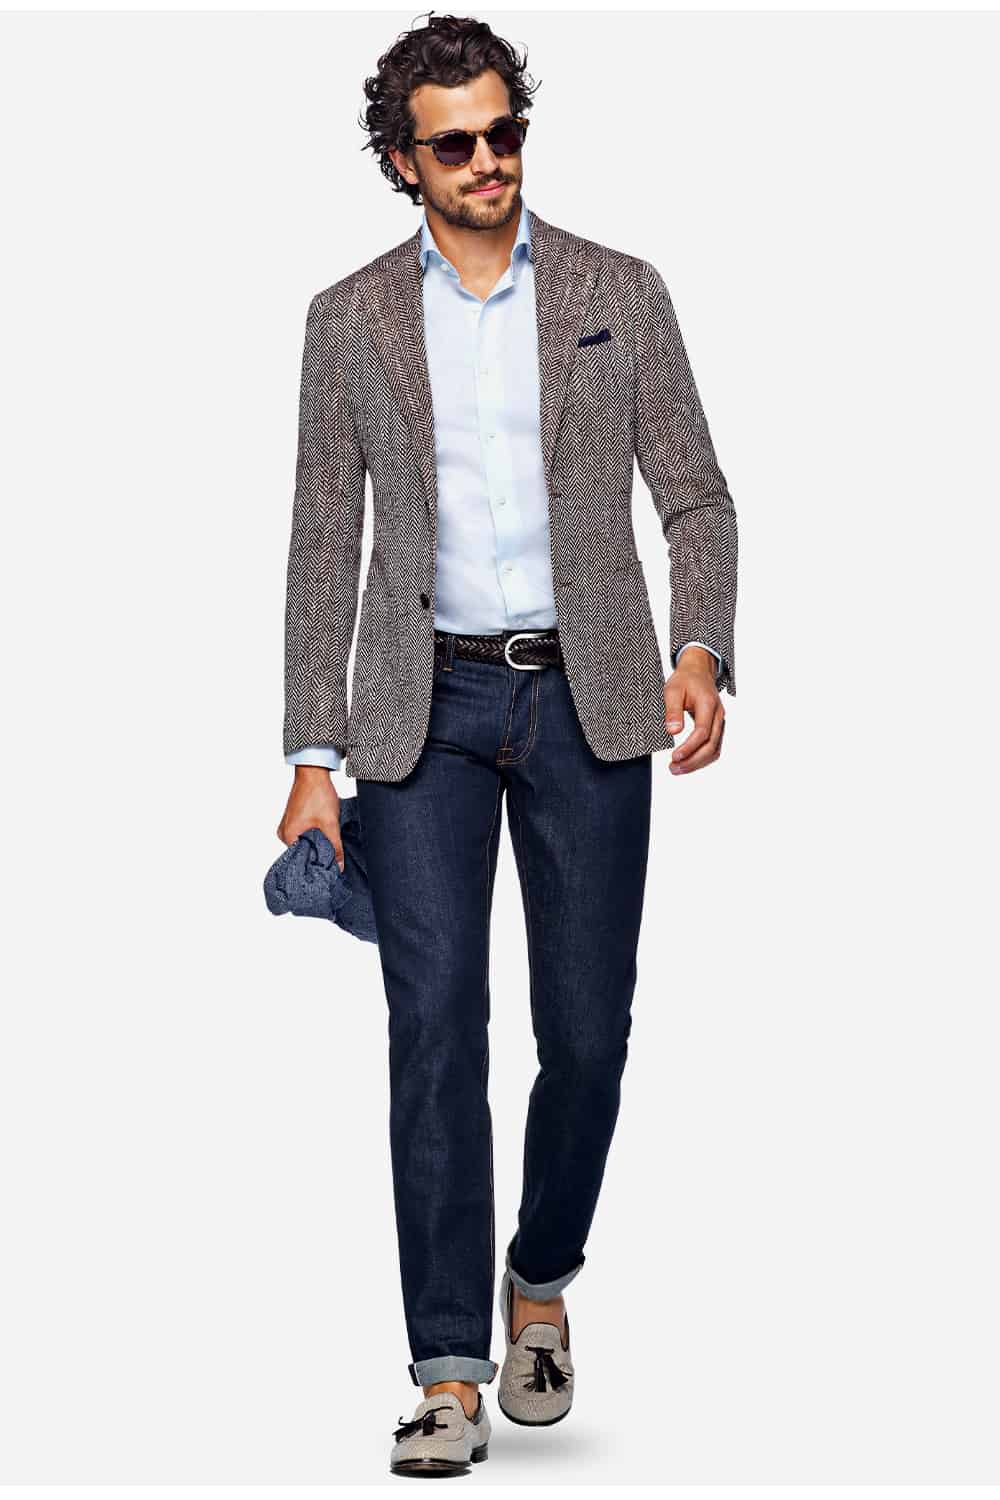 Blazer With Jeans: How To Get The Look Right In 2023 (13 Outfits)